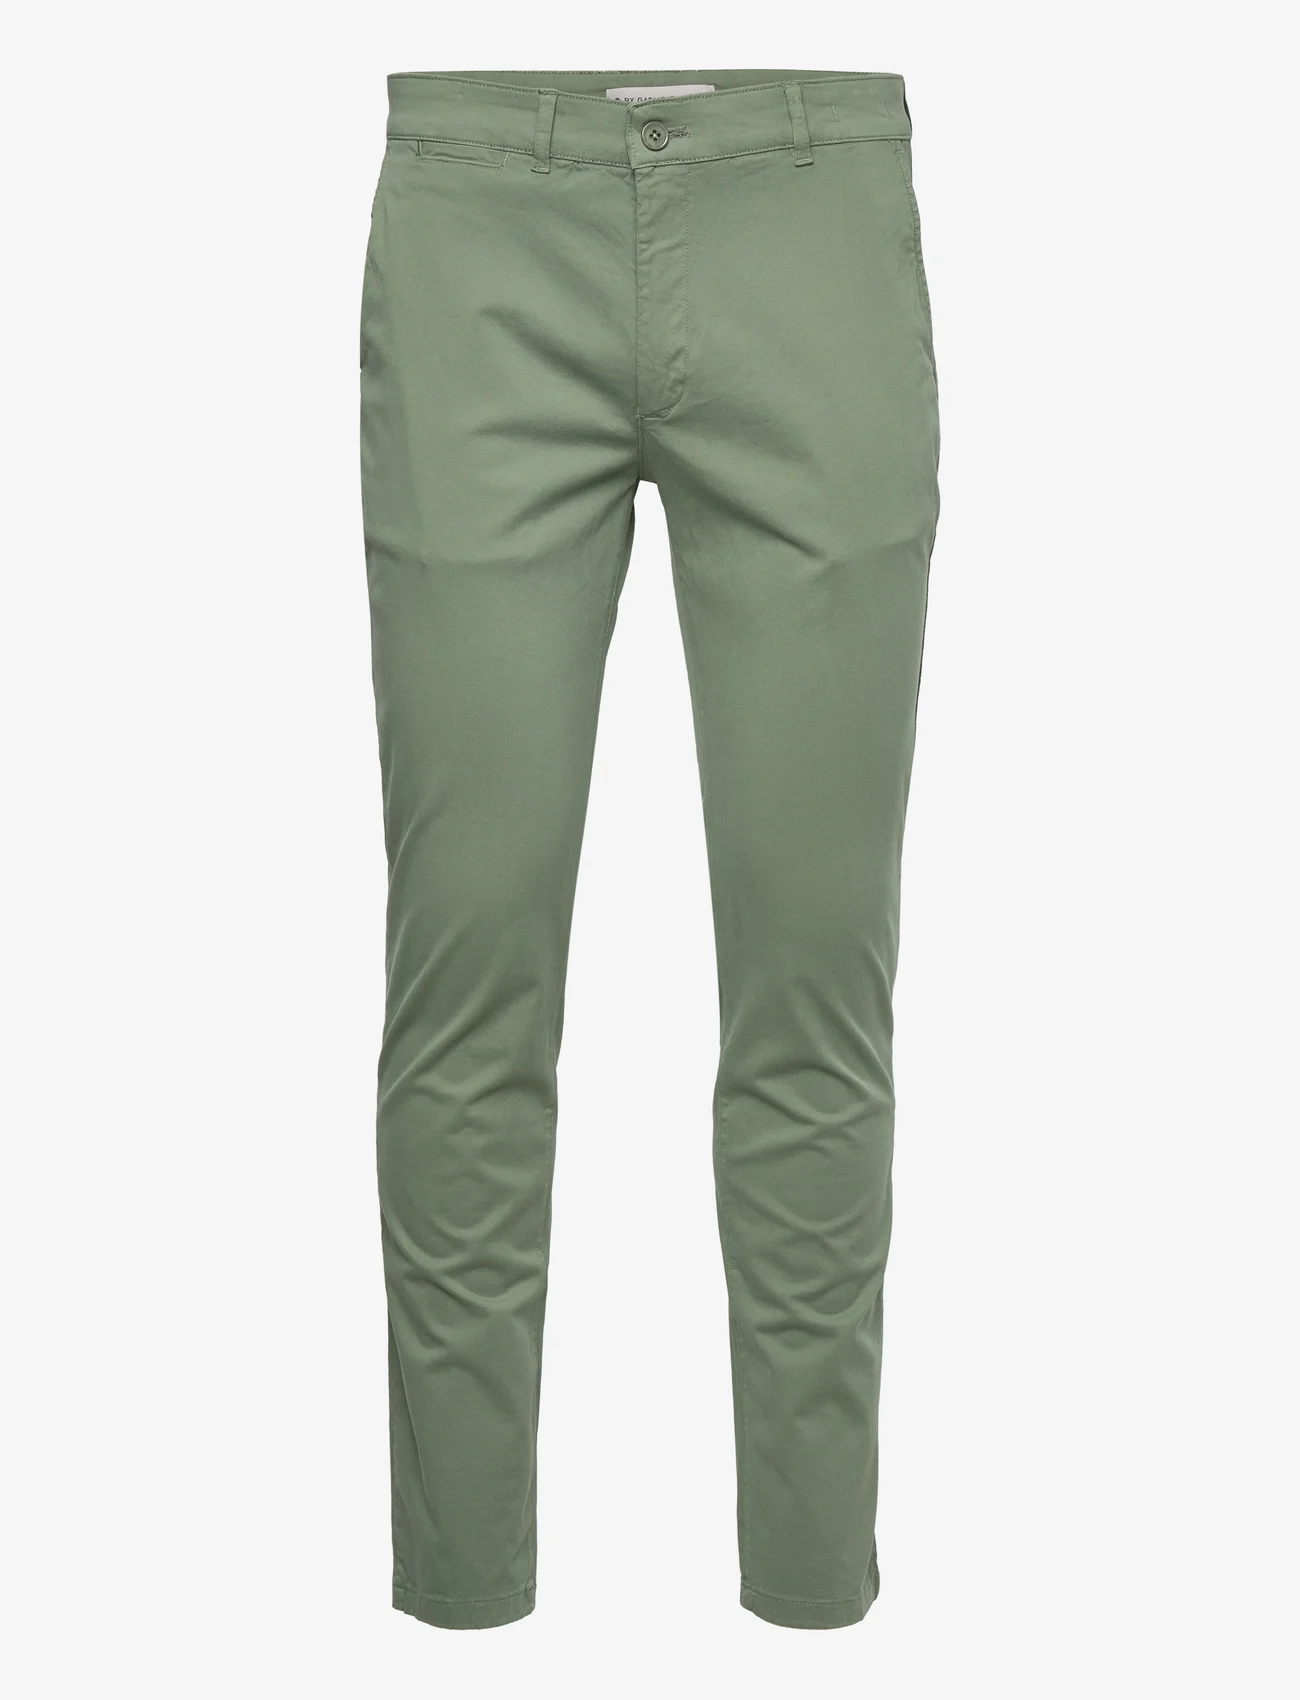 By Garment Makers - The Organic Chino Pants - chinos - dusty olive - 0